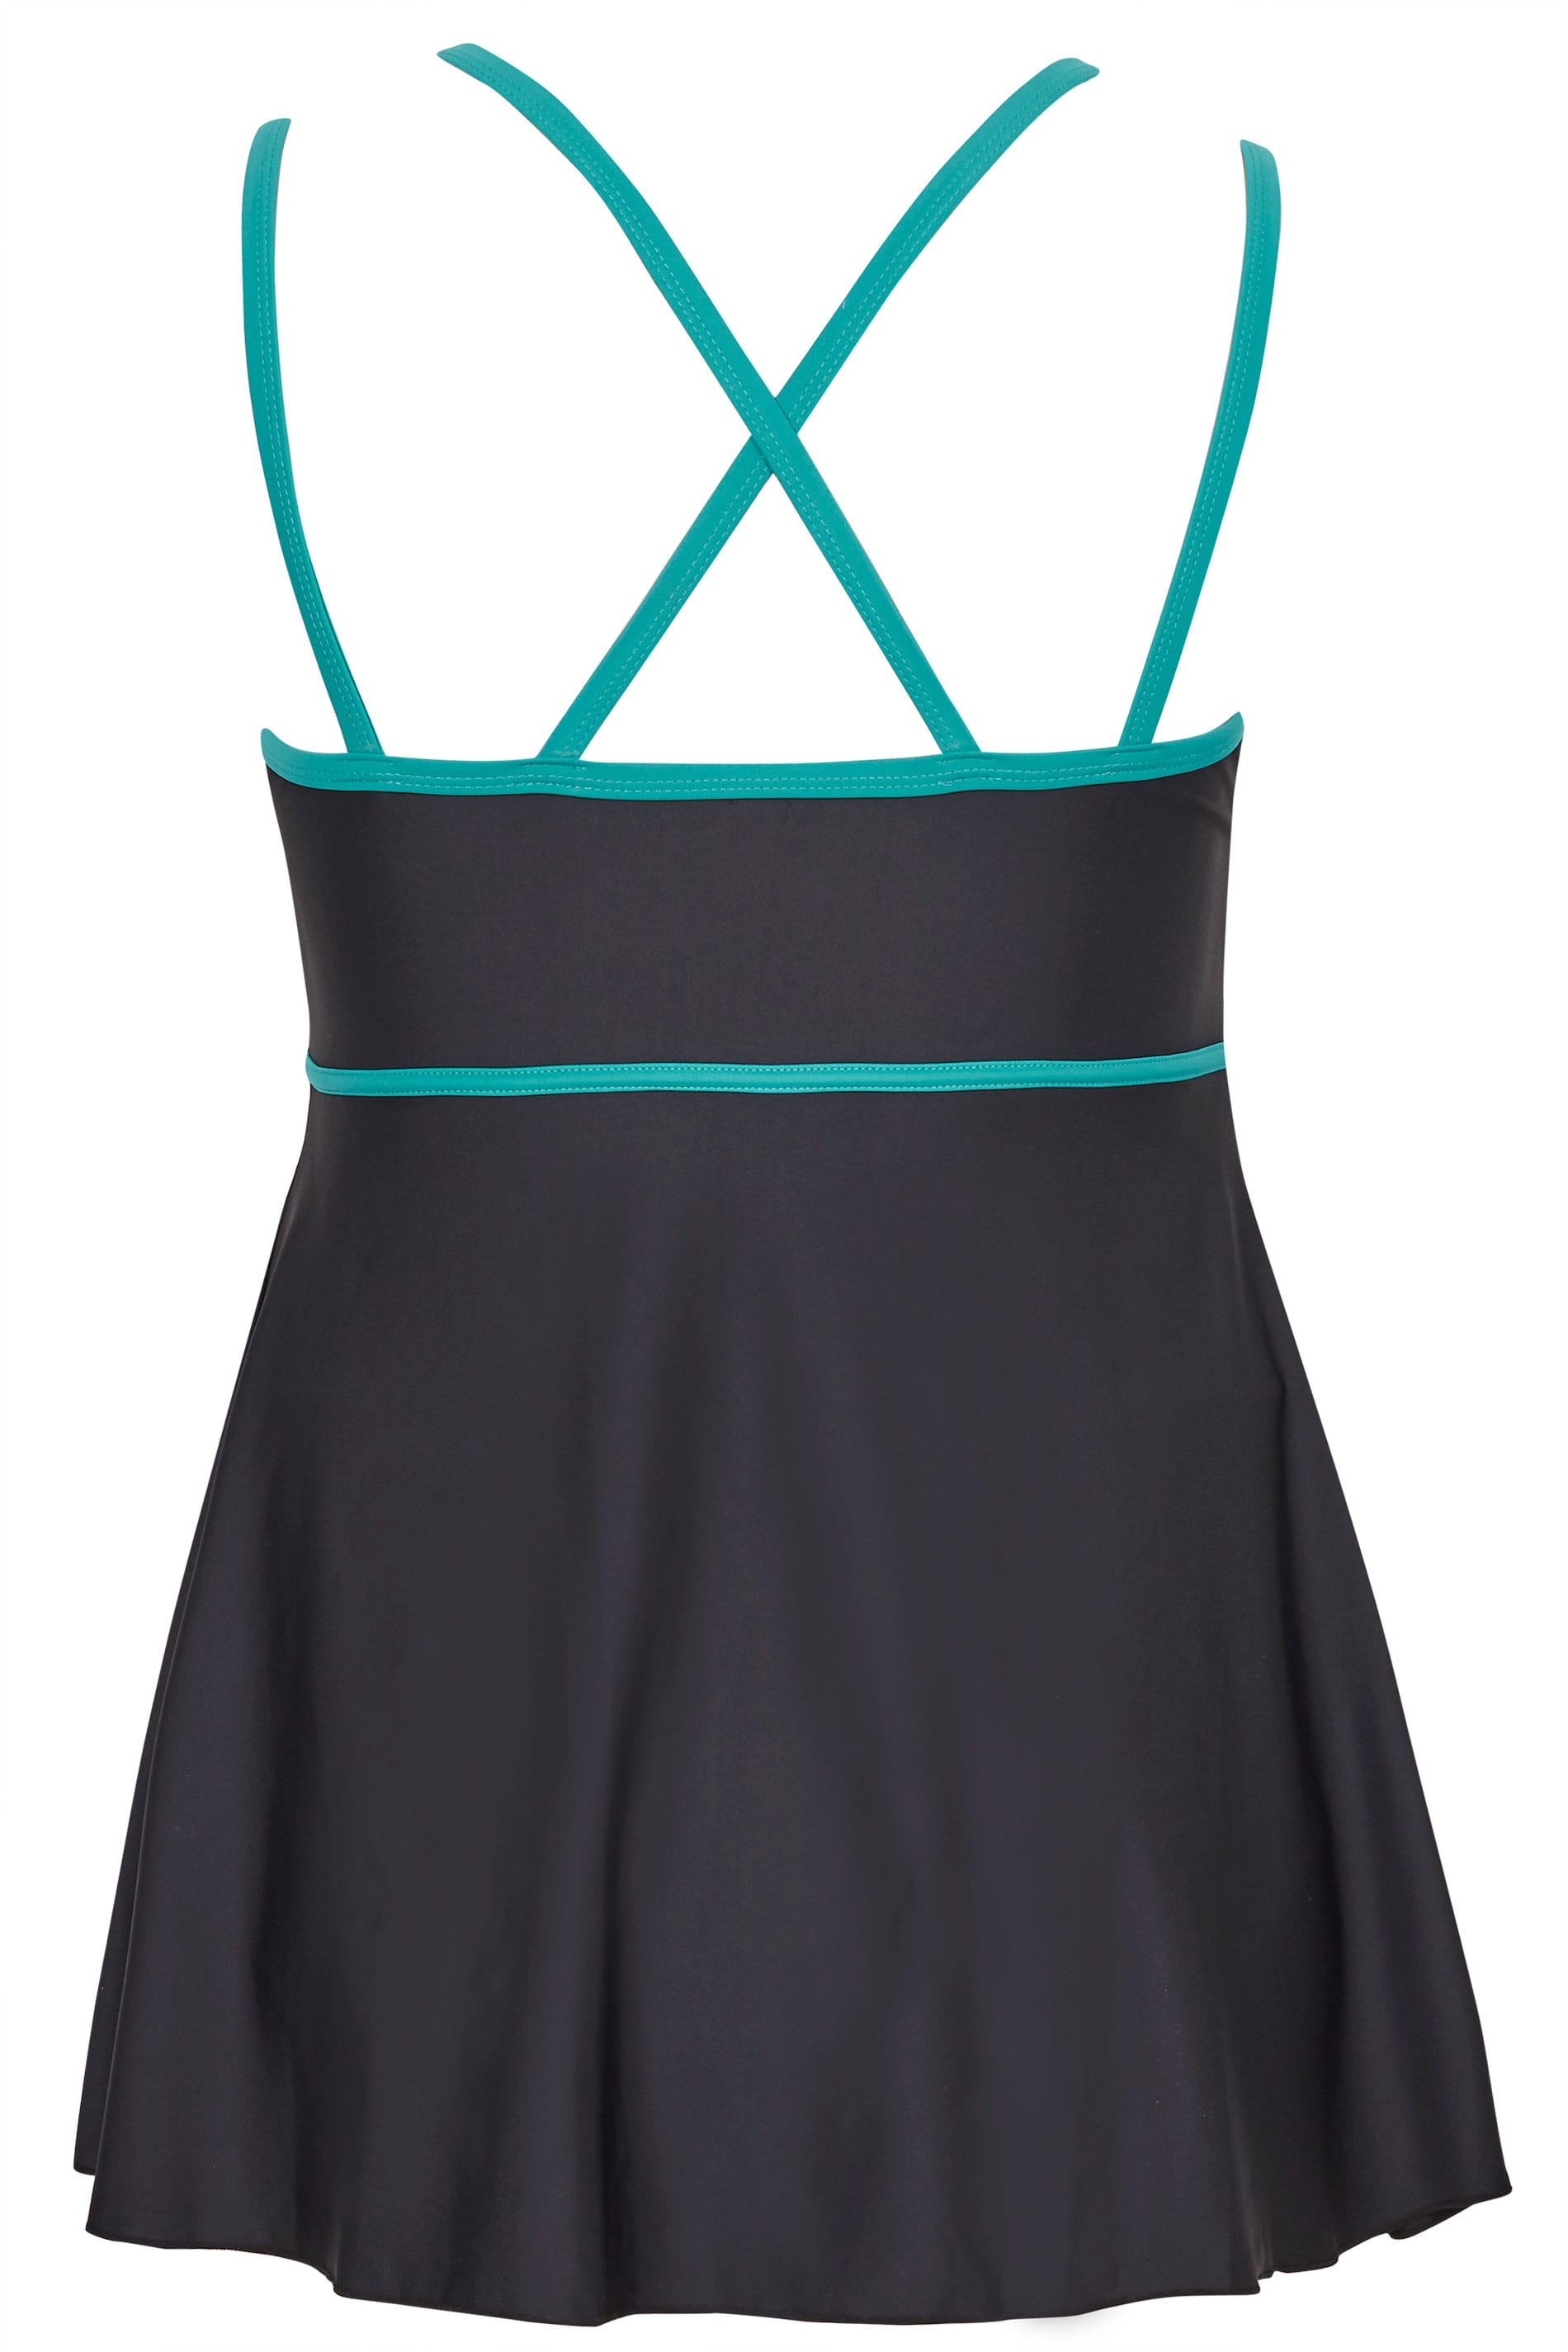 Plus Size Black Piped Swim Dress | Sizes 16 to 36 | Yours Clothing